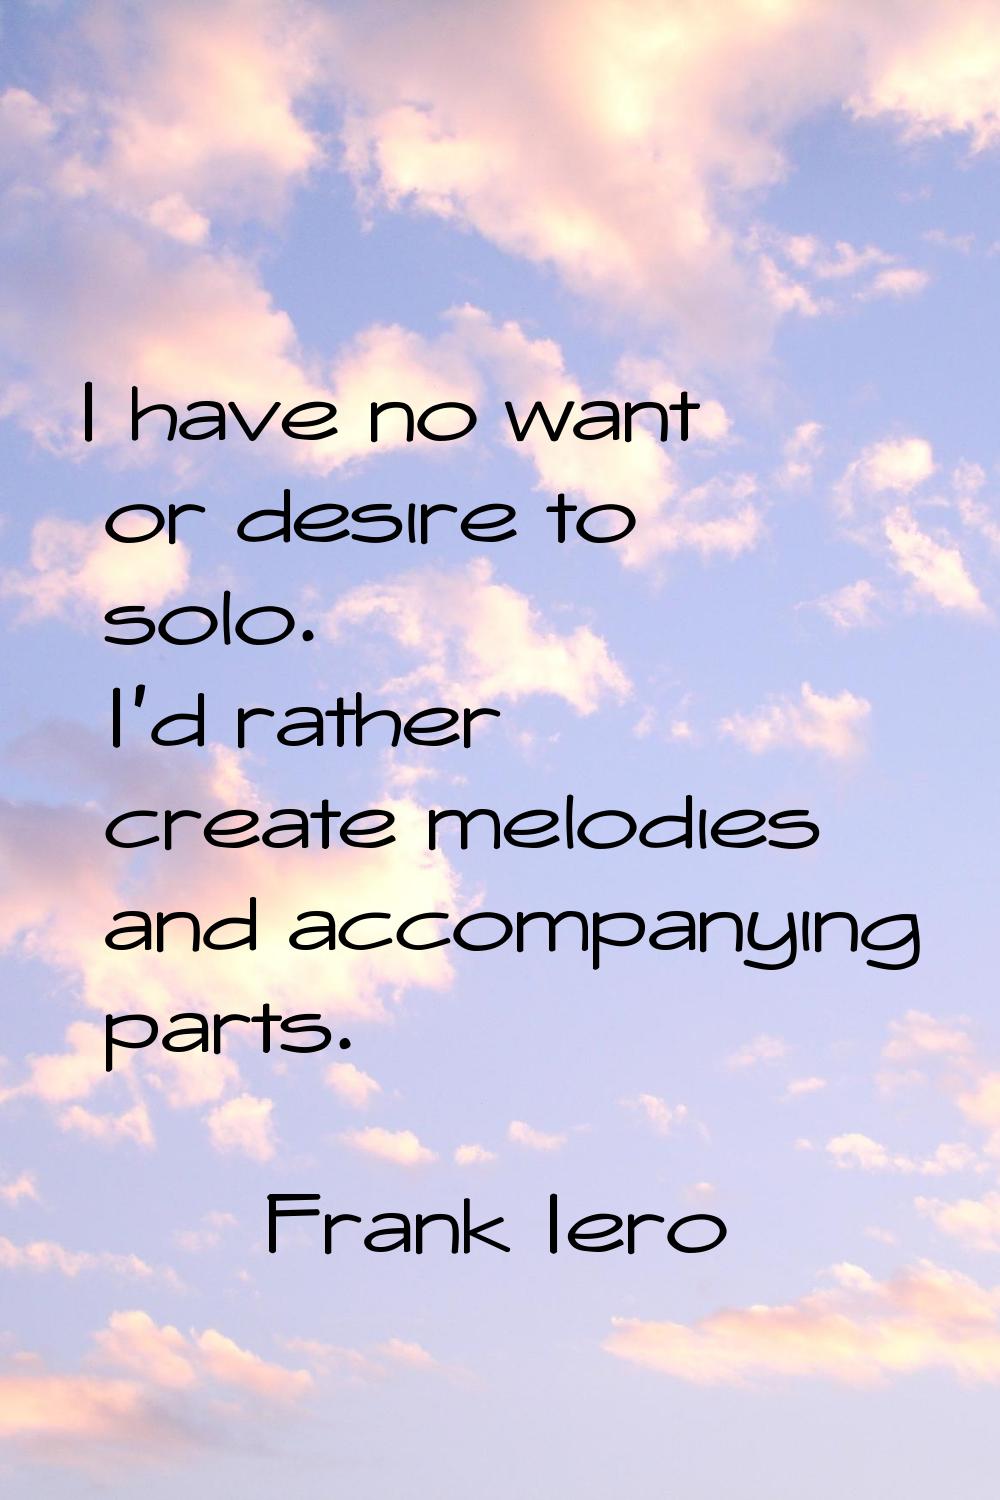 I have no want or desire to solo. I'd rather create melodies and accompanying parts.